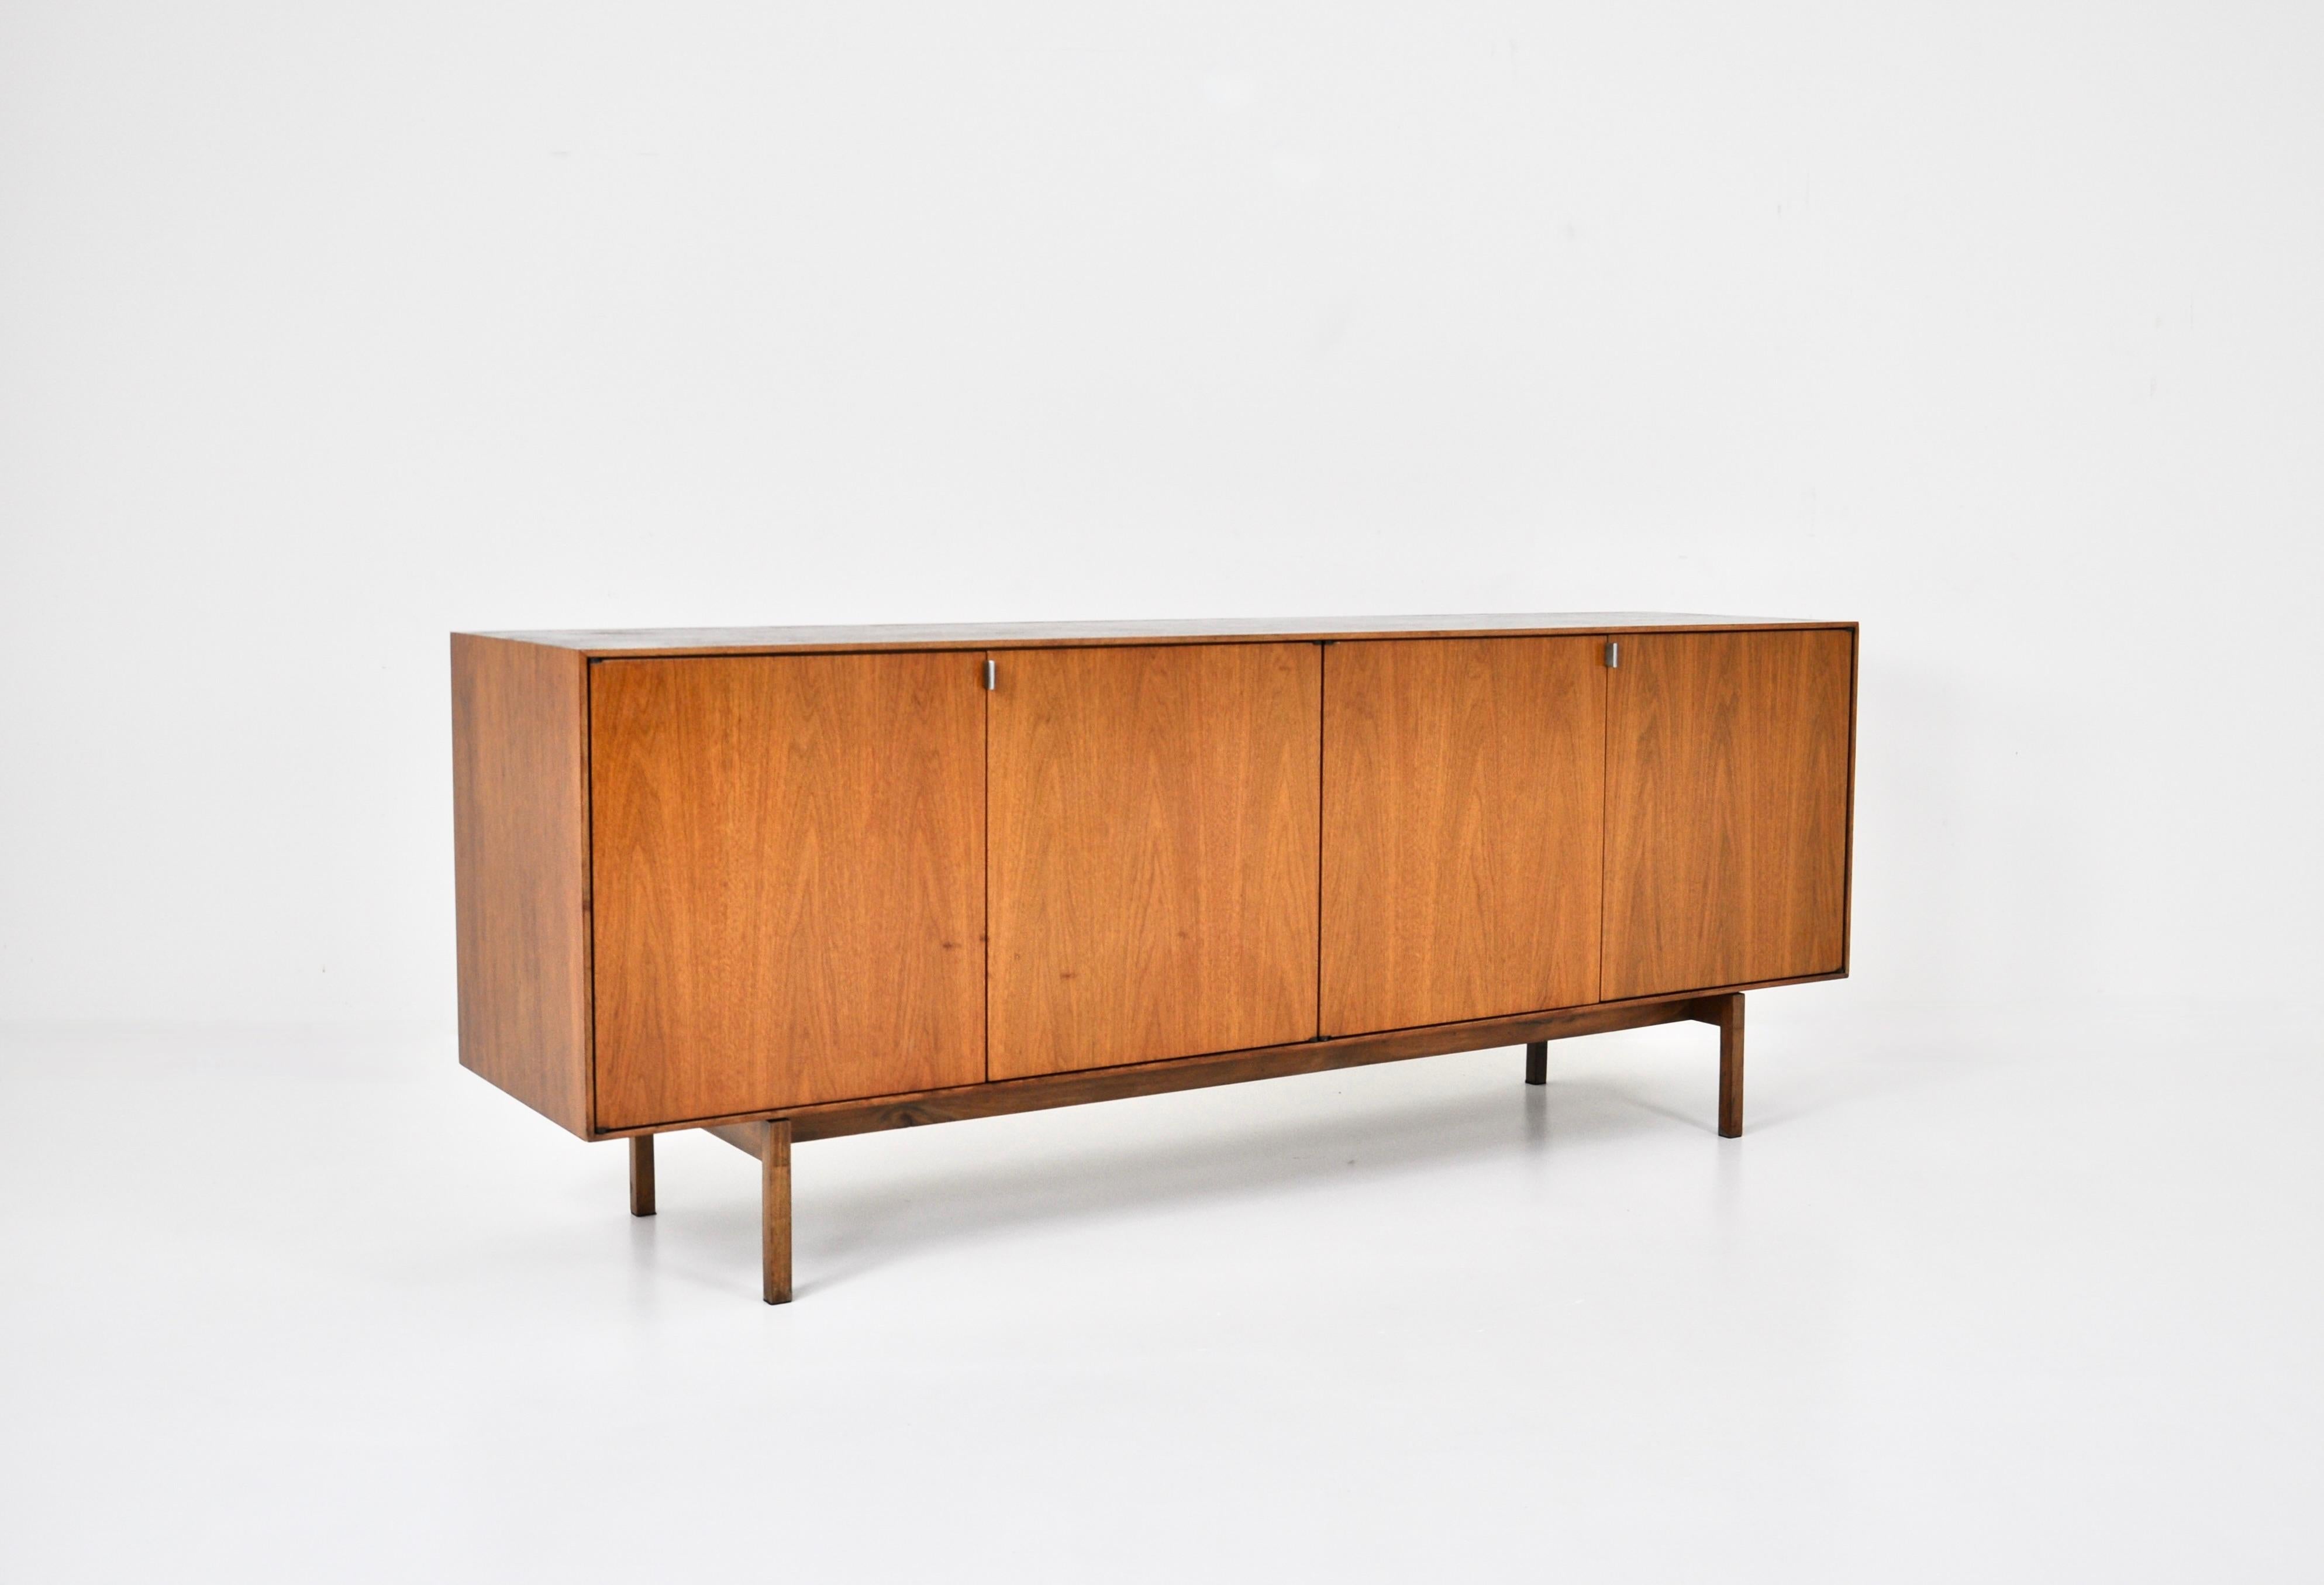 Wooden sideboard with 4 doors containing 2 drawers, 2 shelves and a large shelf by Florence Knoll. The handles are in metal. Wear due to time and age of the sideboard.